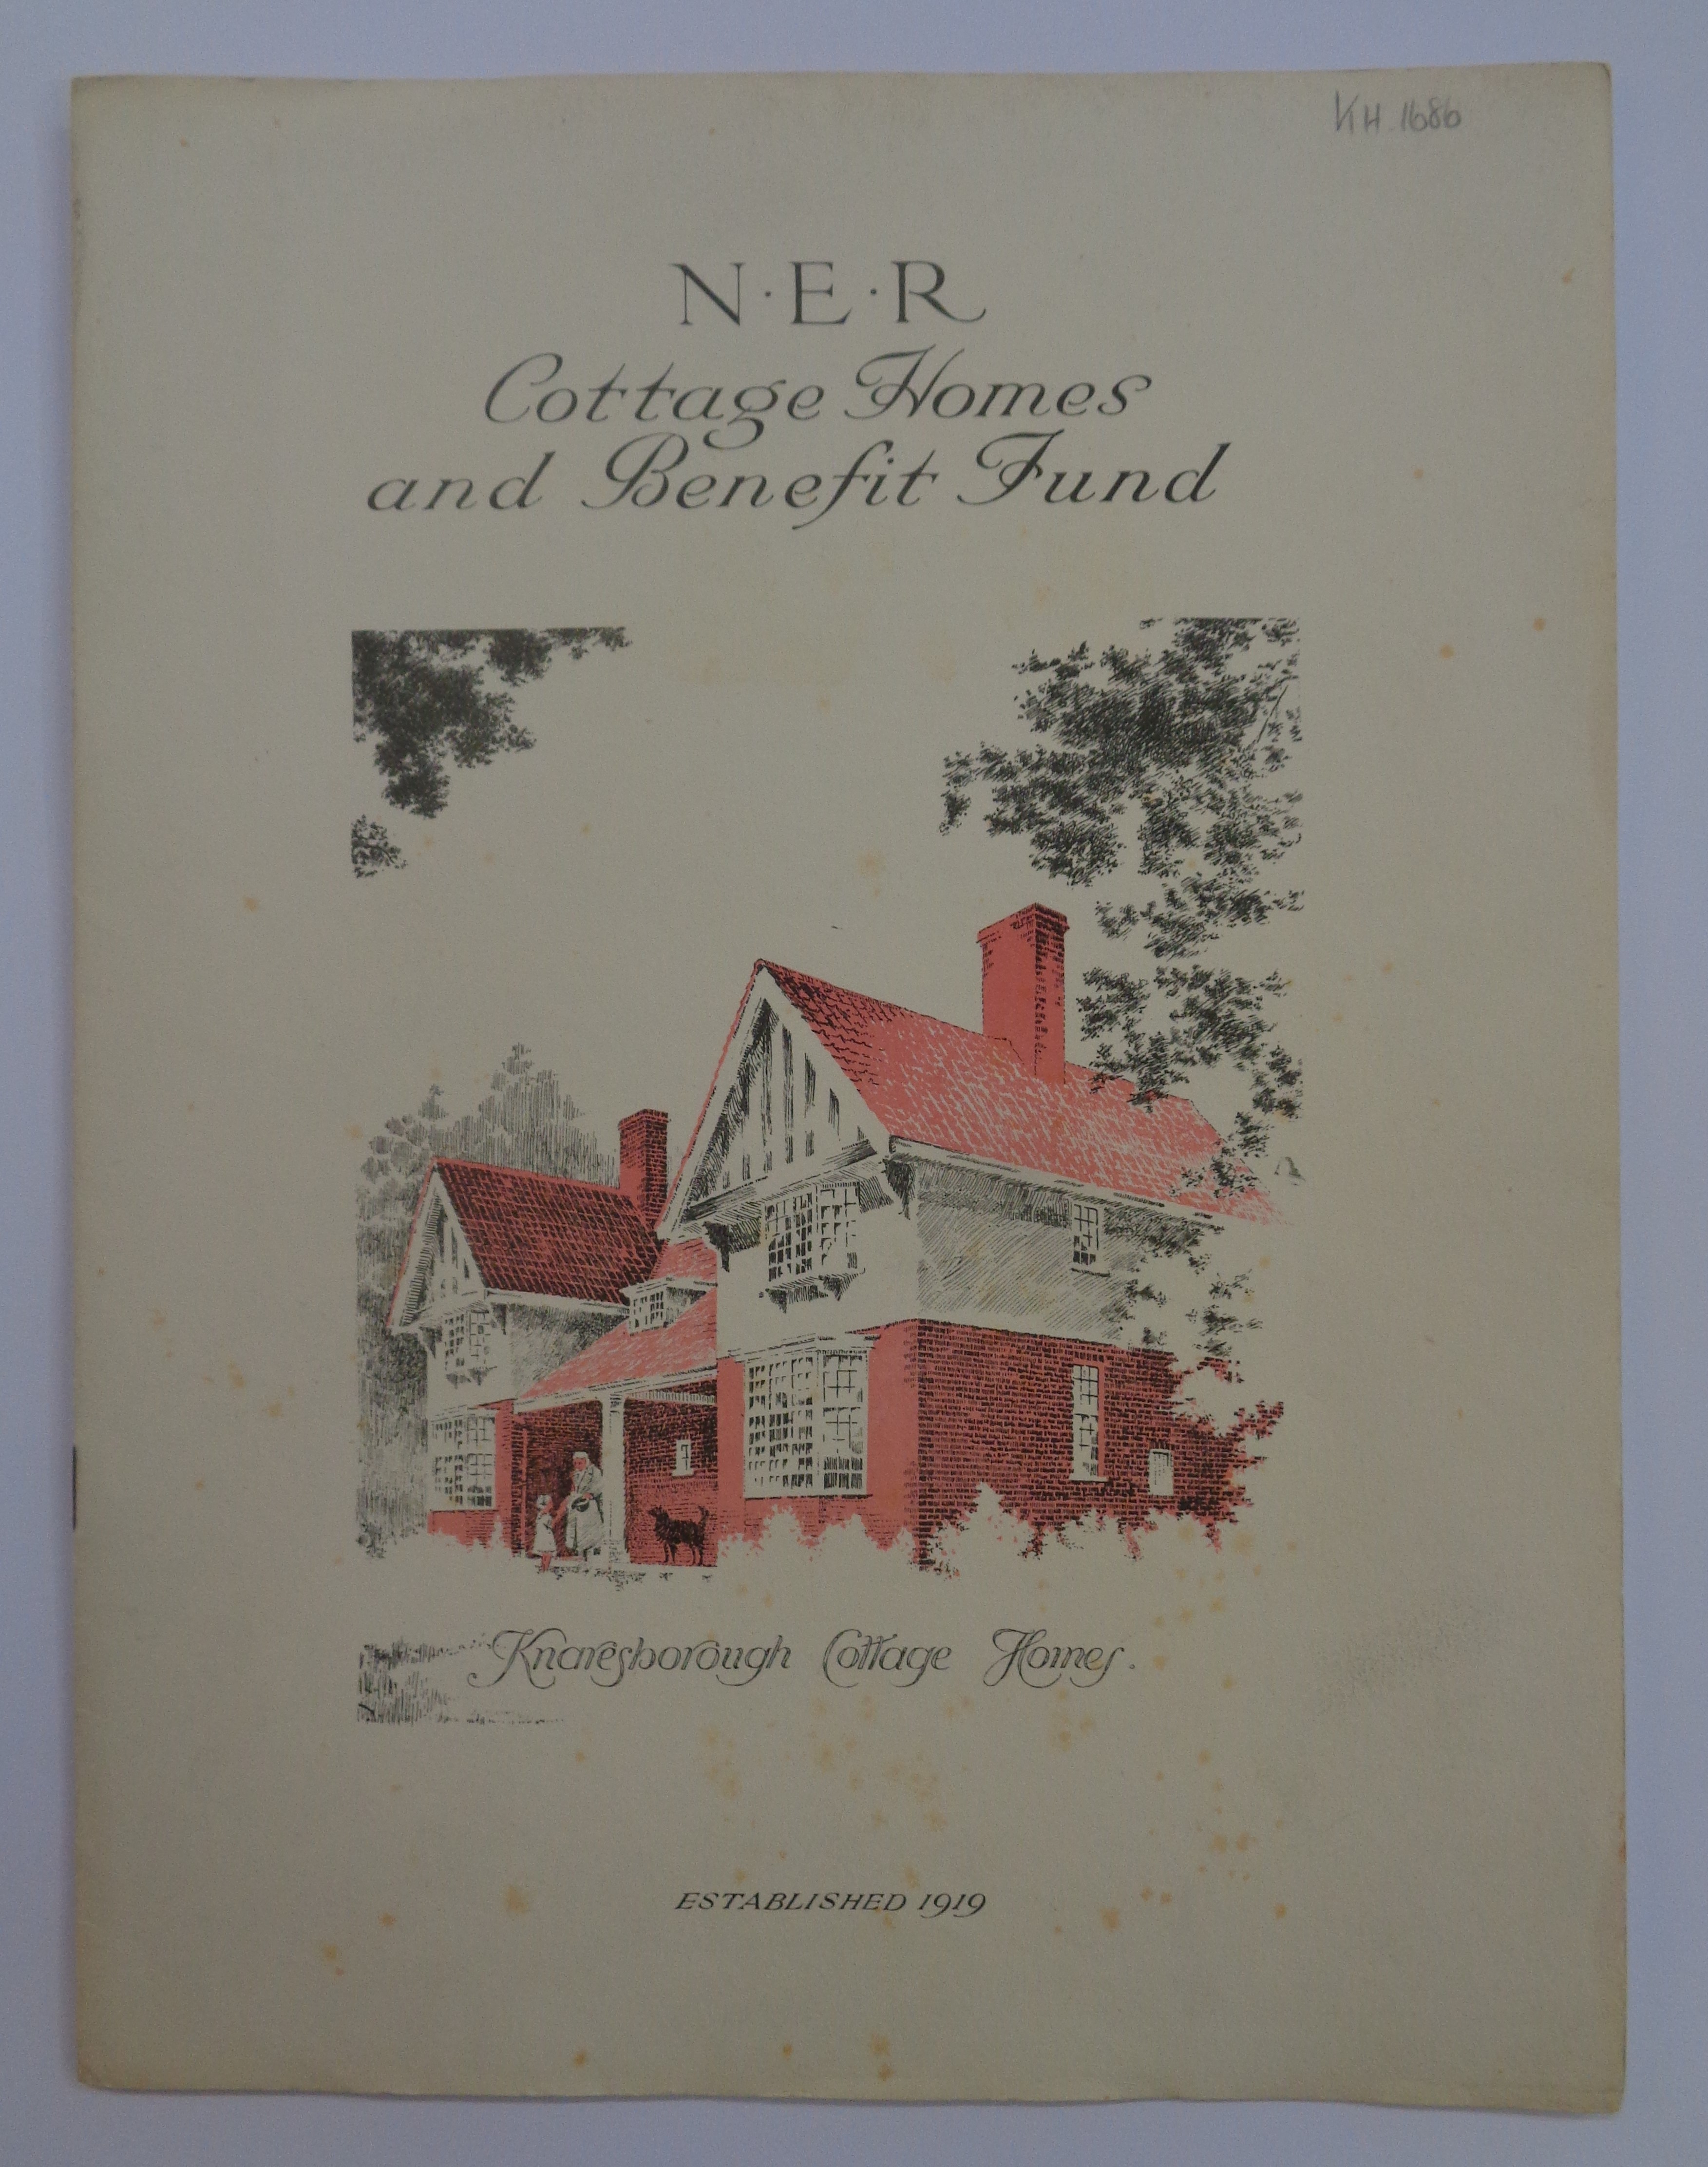 Cottage Homes brochure with image of property in centre.